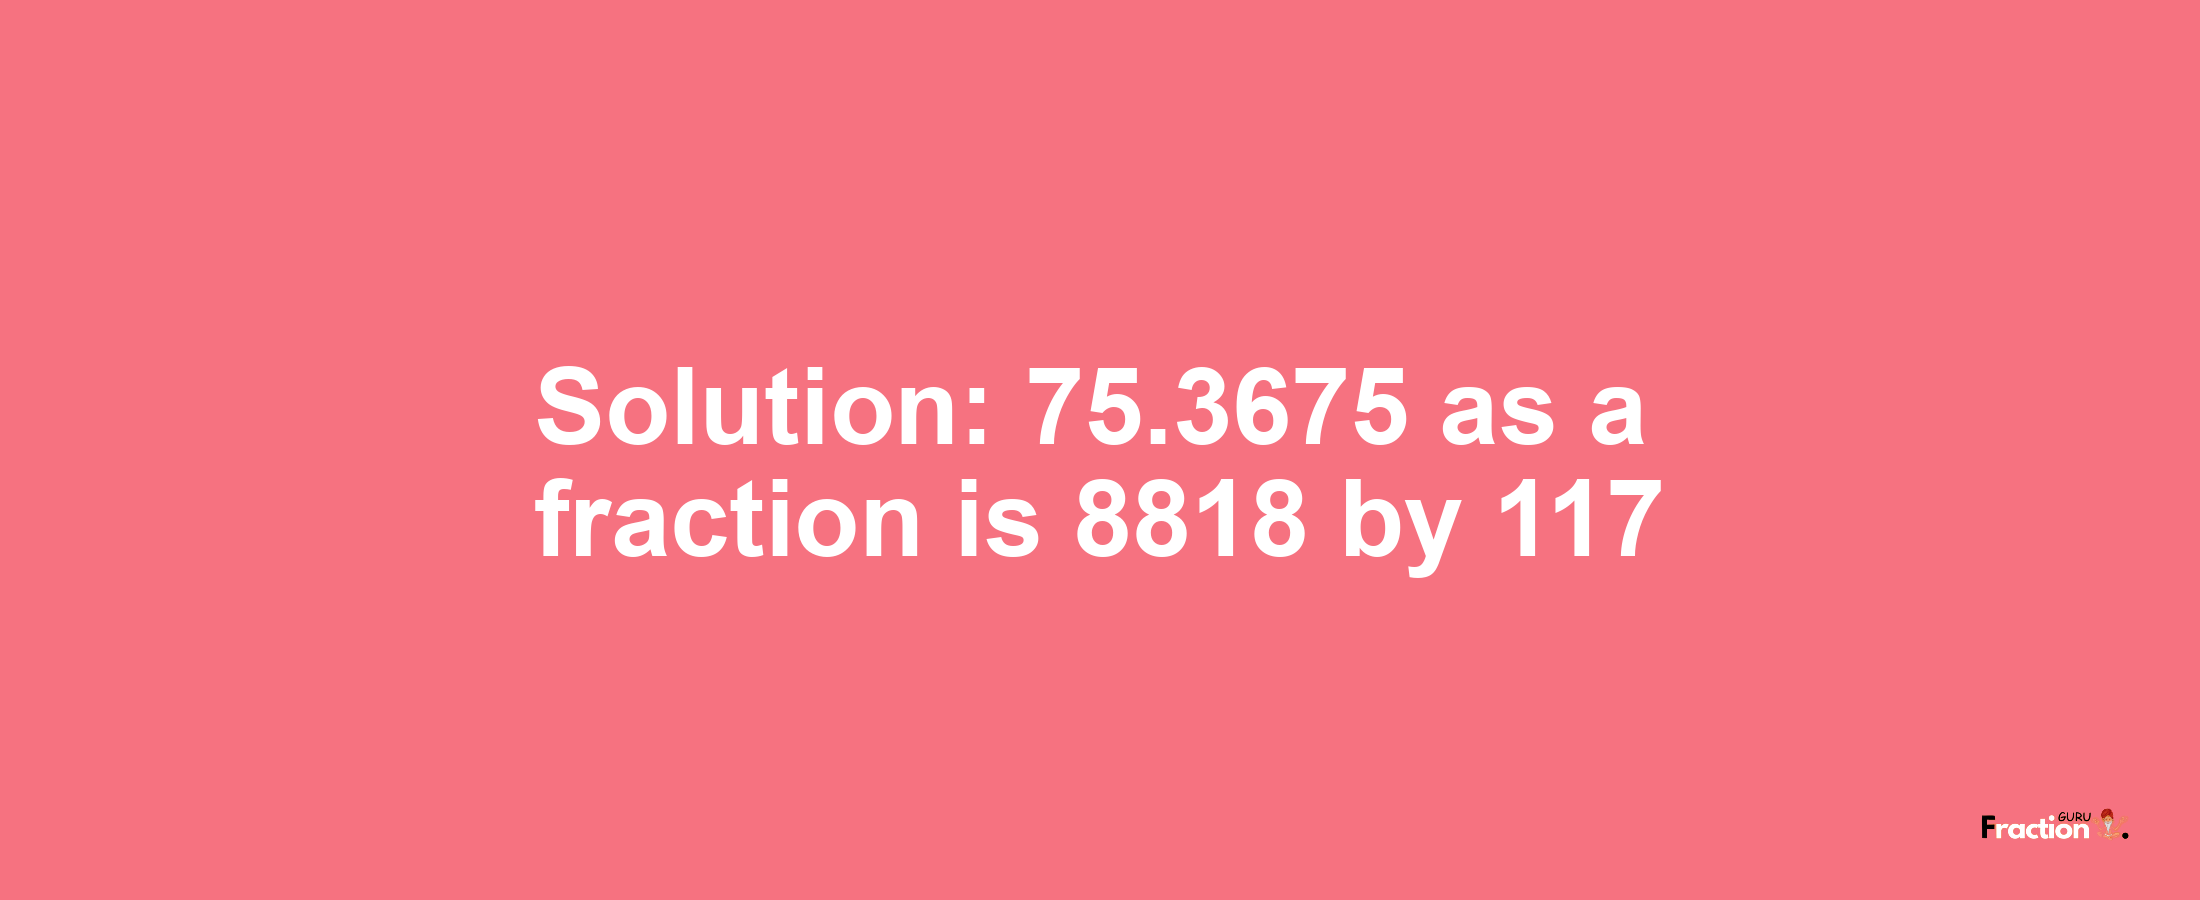 Solution:75.3675 as a fraction is 8818/117